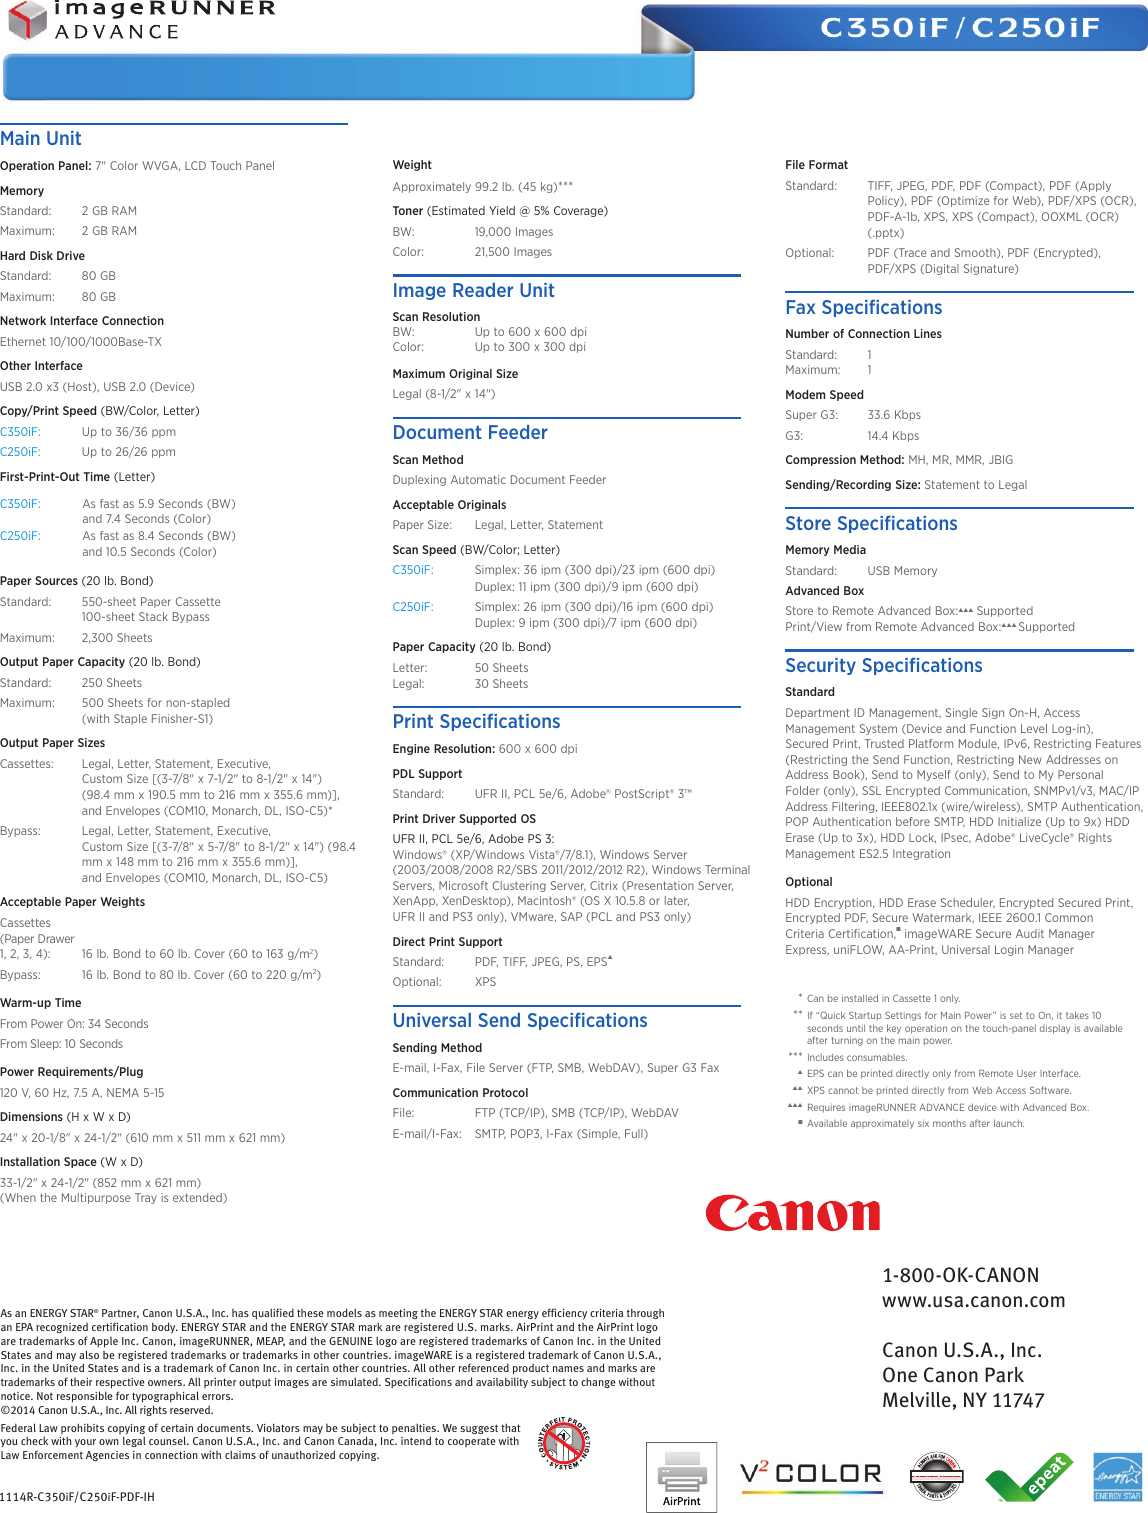 Page 12 of 12 - Canon Canon-Imagerunner-Advance-C350If-Brochure-  Canon-imagerunner-advance-c350if-brochure